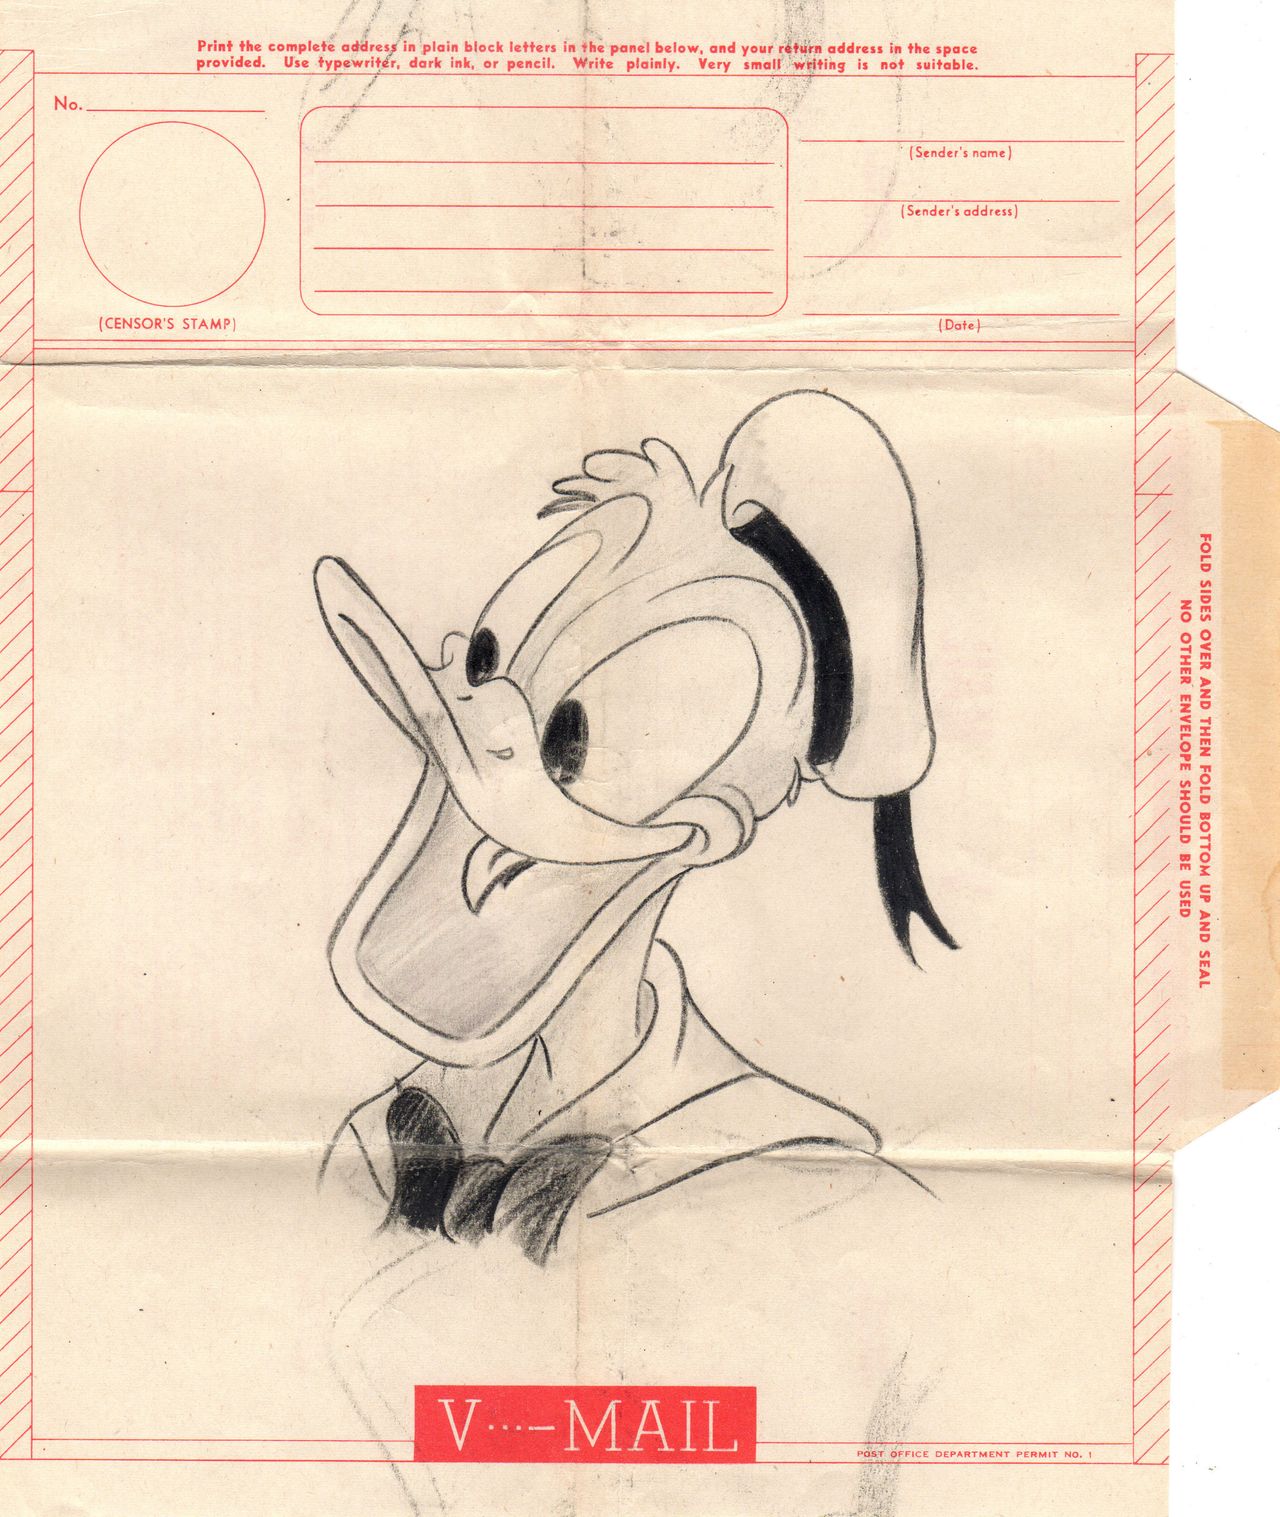 A drawing of Donald Duck done by Virginia Fleener.